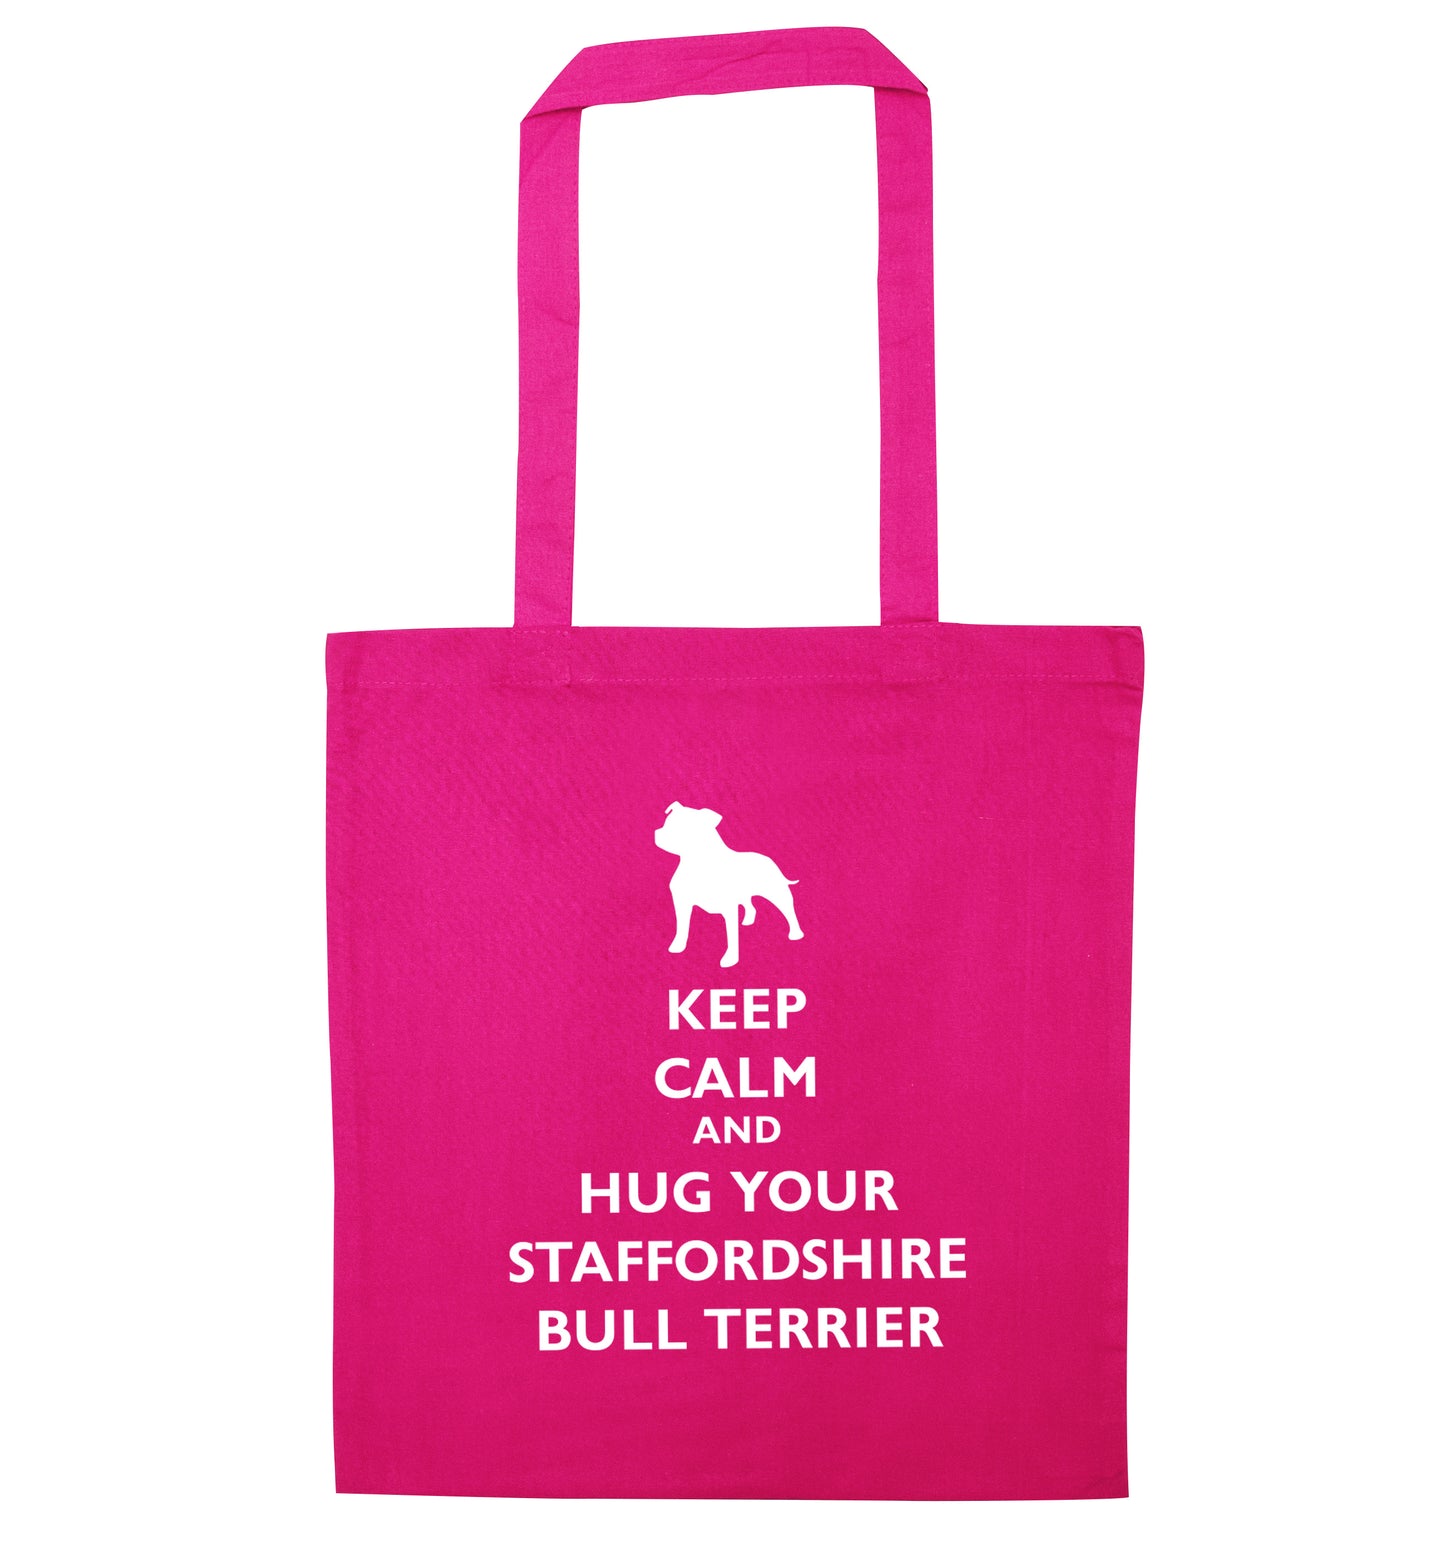 Keep calm and hug your bull terrier  pink tote bag